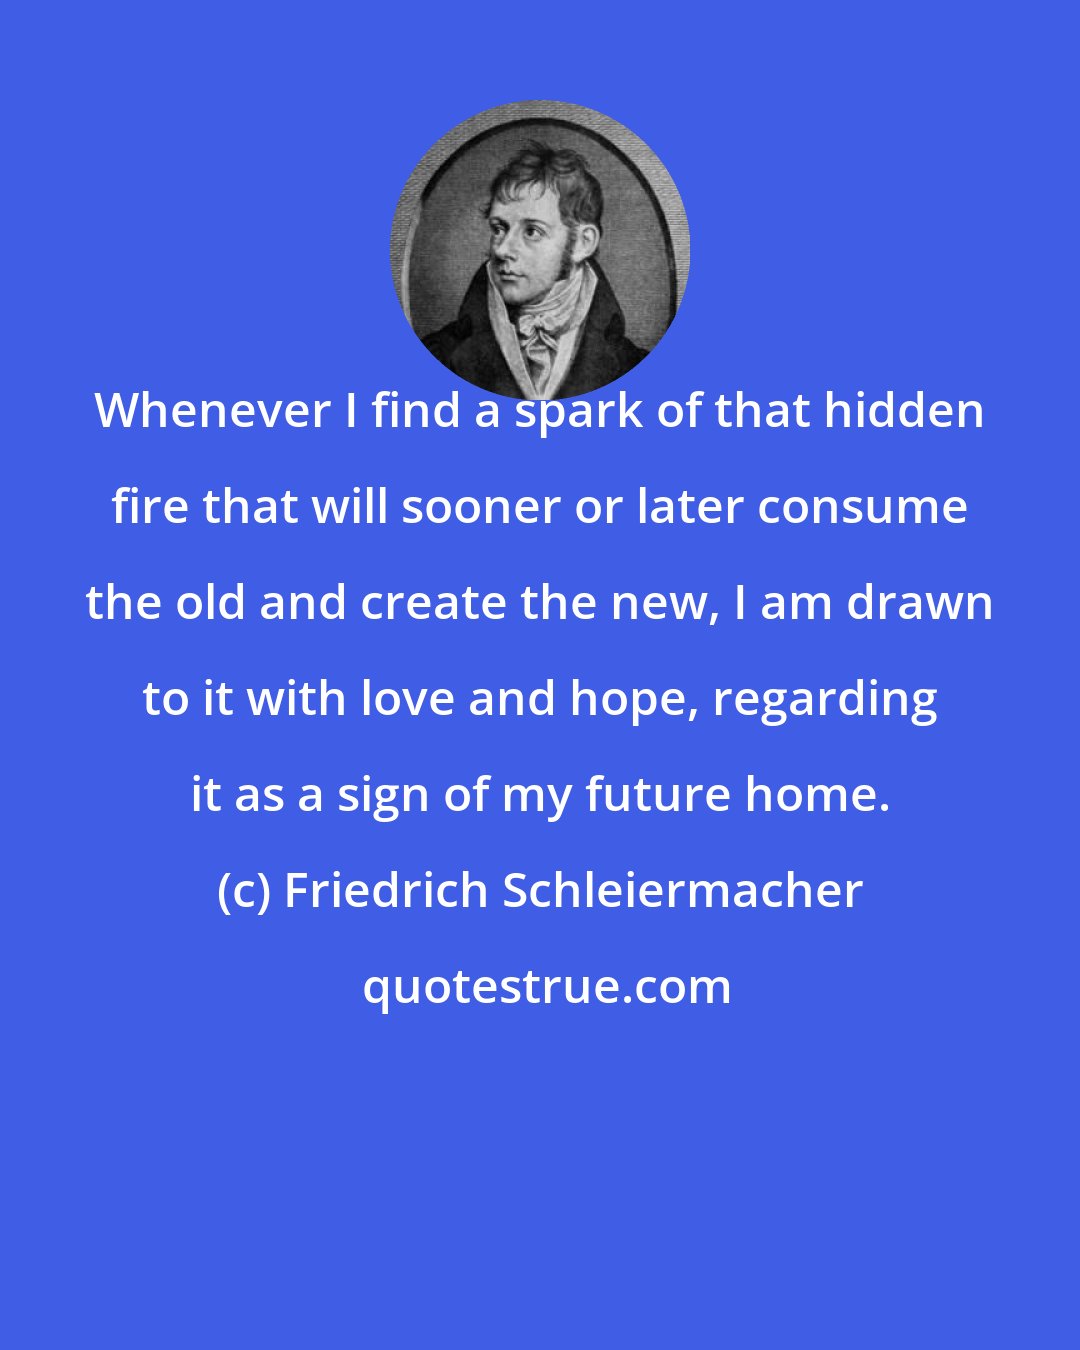 Friedrich Schleiermacher: Whenever I find a spark of that hidden fire that will sooner or later consume the old and create the new, I am drawn to it with love and hope, regarding it as a sign of my future home.